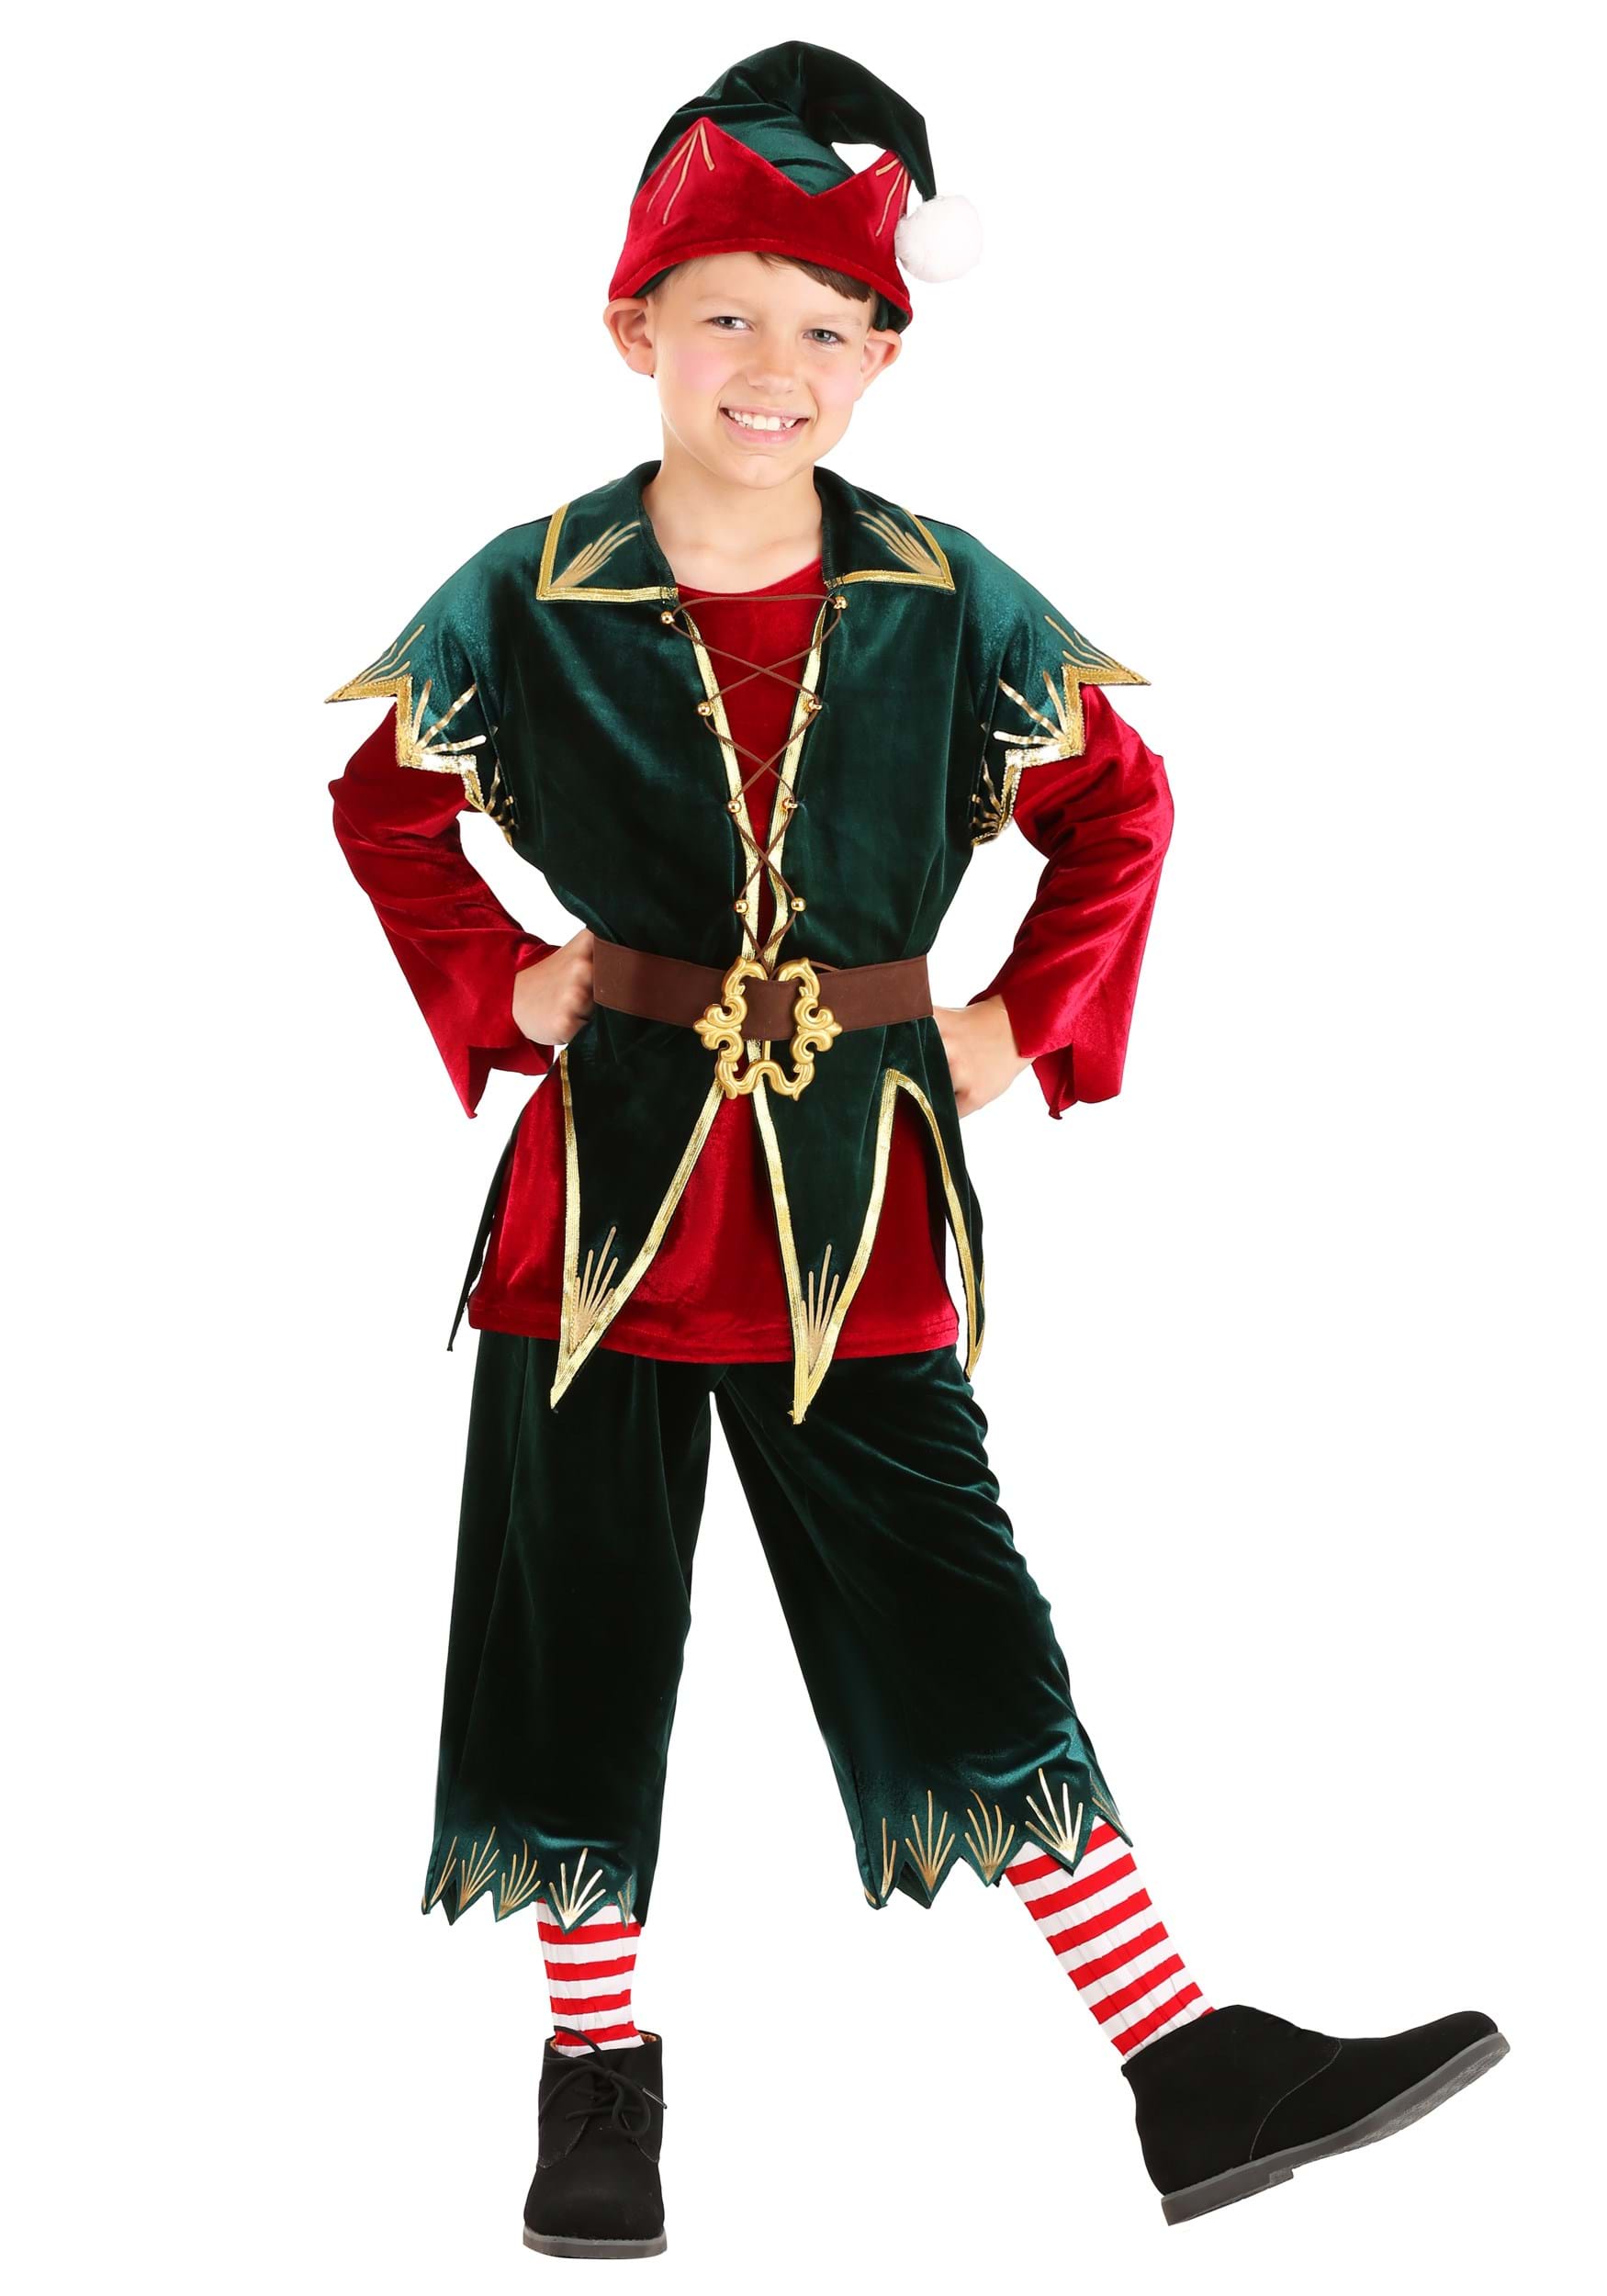 Photos - Fancy Dress Deluxe FUN Costumes  Boys Holiday Elf Costume Green/Orange/Red 